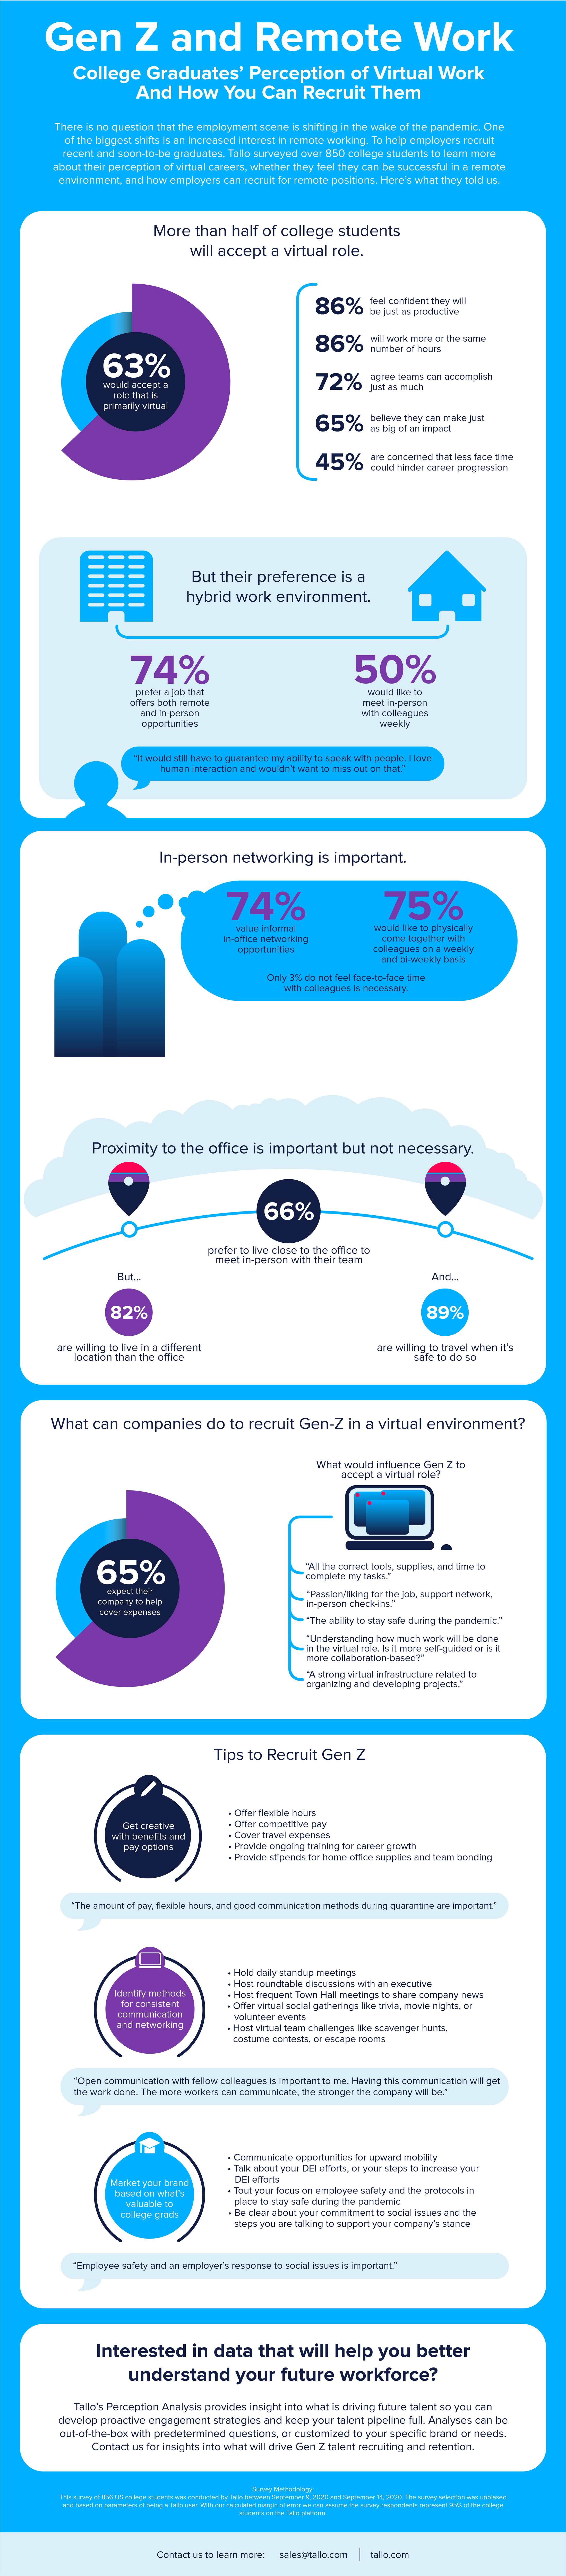 Tallo infographic showing what Gen Z think about remote working.